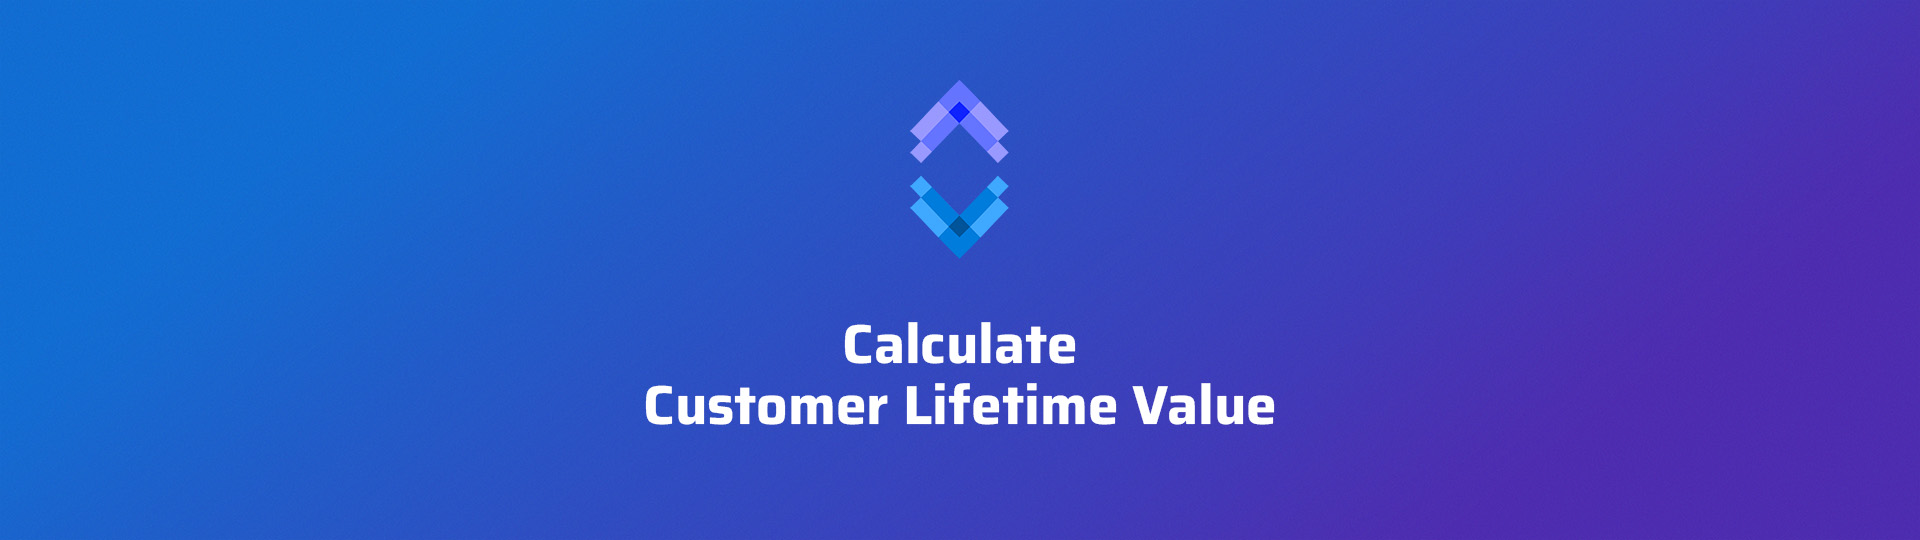 How to Calculate Customer Lifetime Value